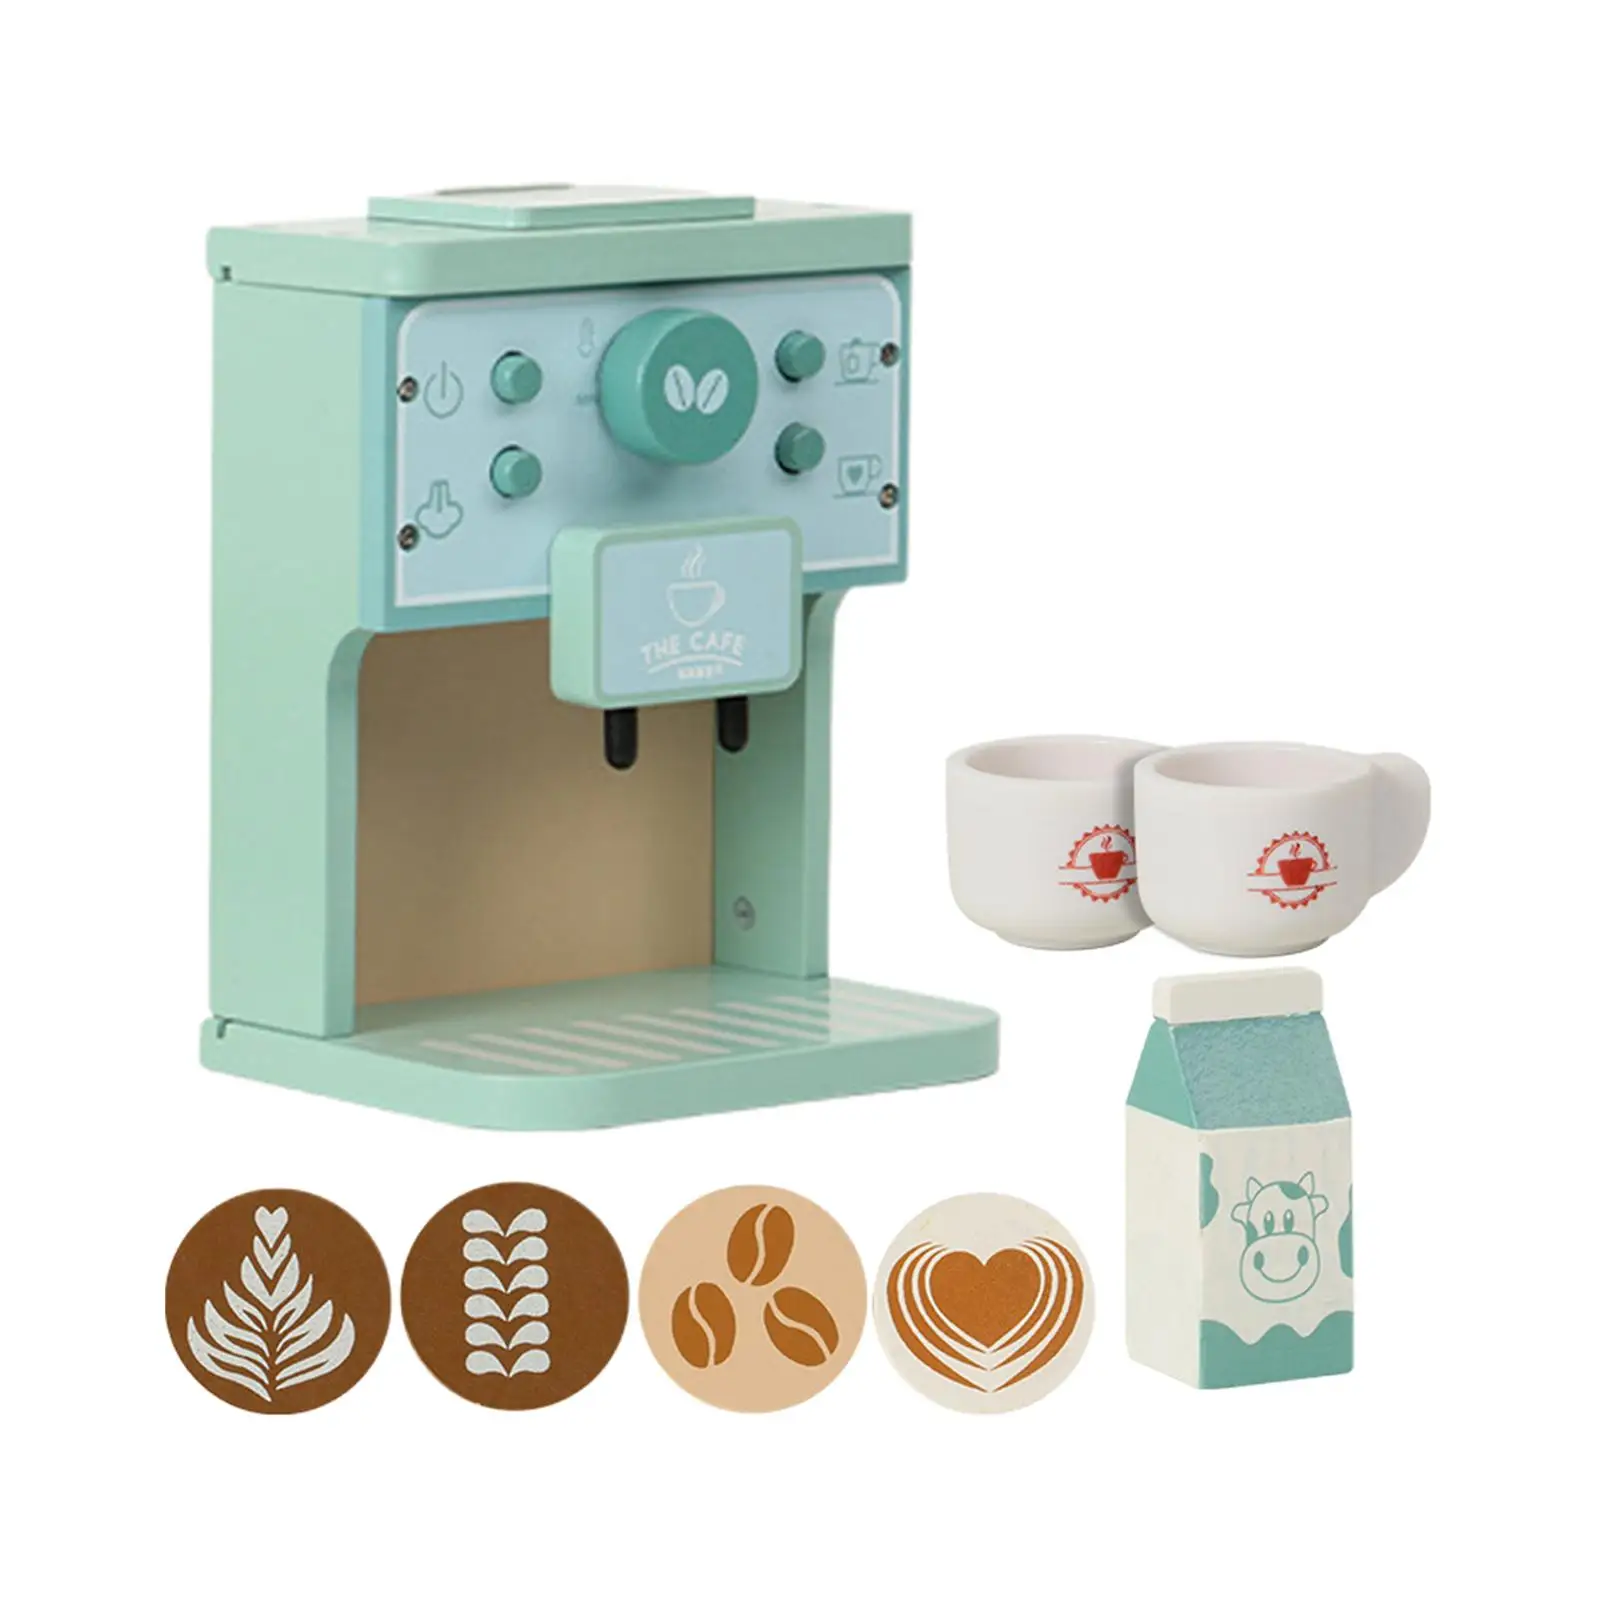 8x Wooden Coffee Maker Set Pretend Play Kitchen Accessories for Toddlers